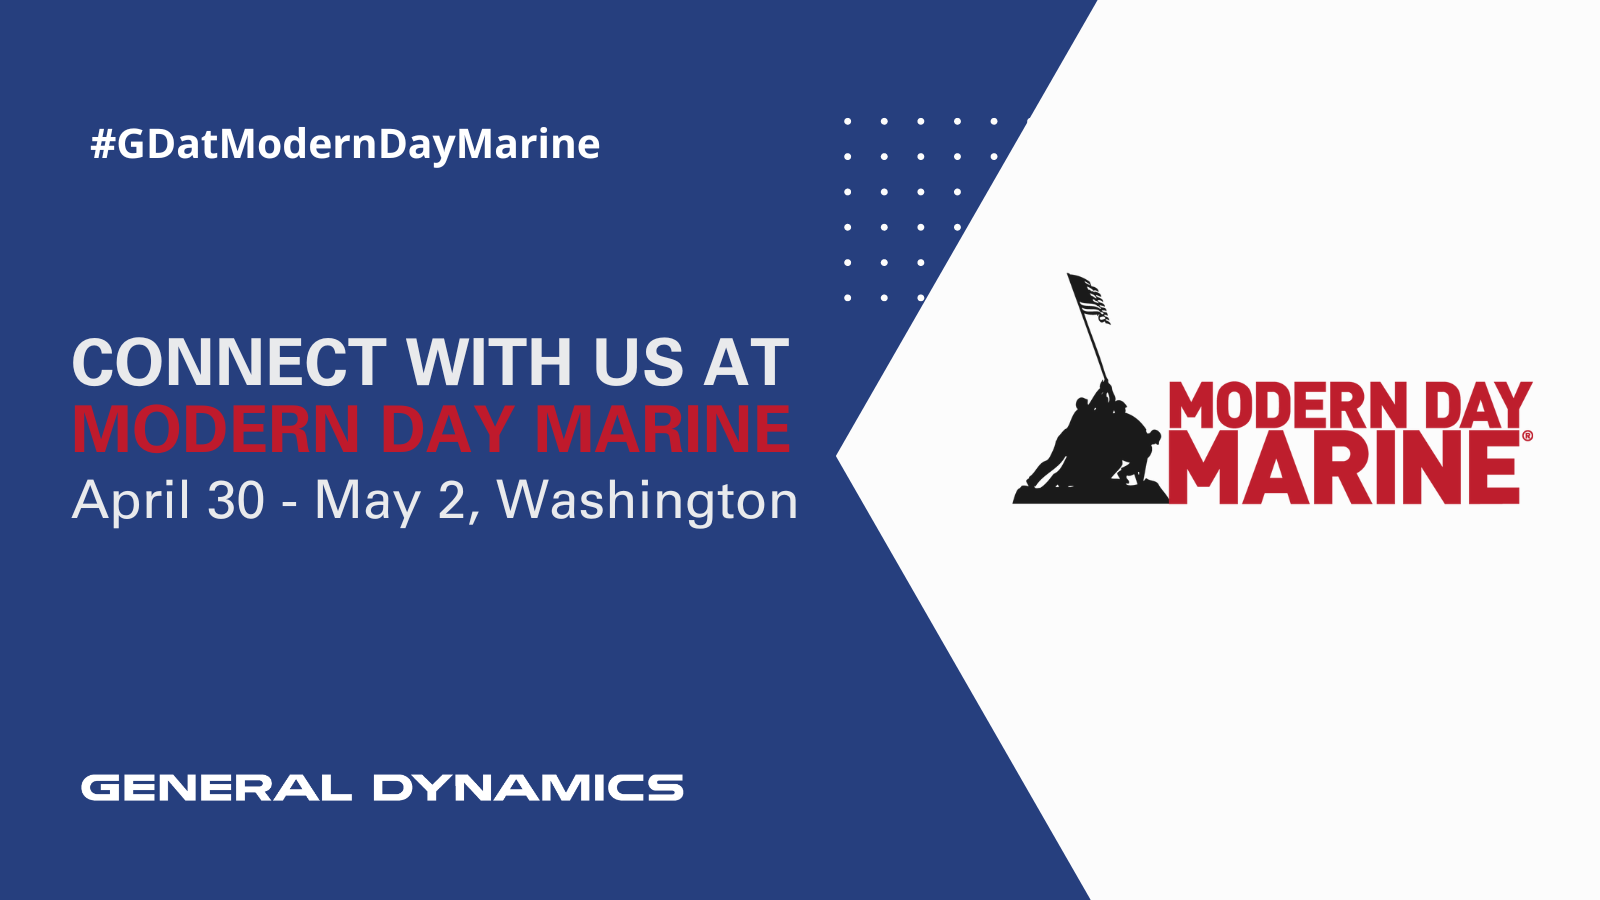 Blue event card with text saying "connect with us at Modern Day Marine, April 30 - May 2, Washington."